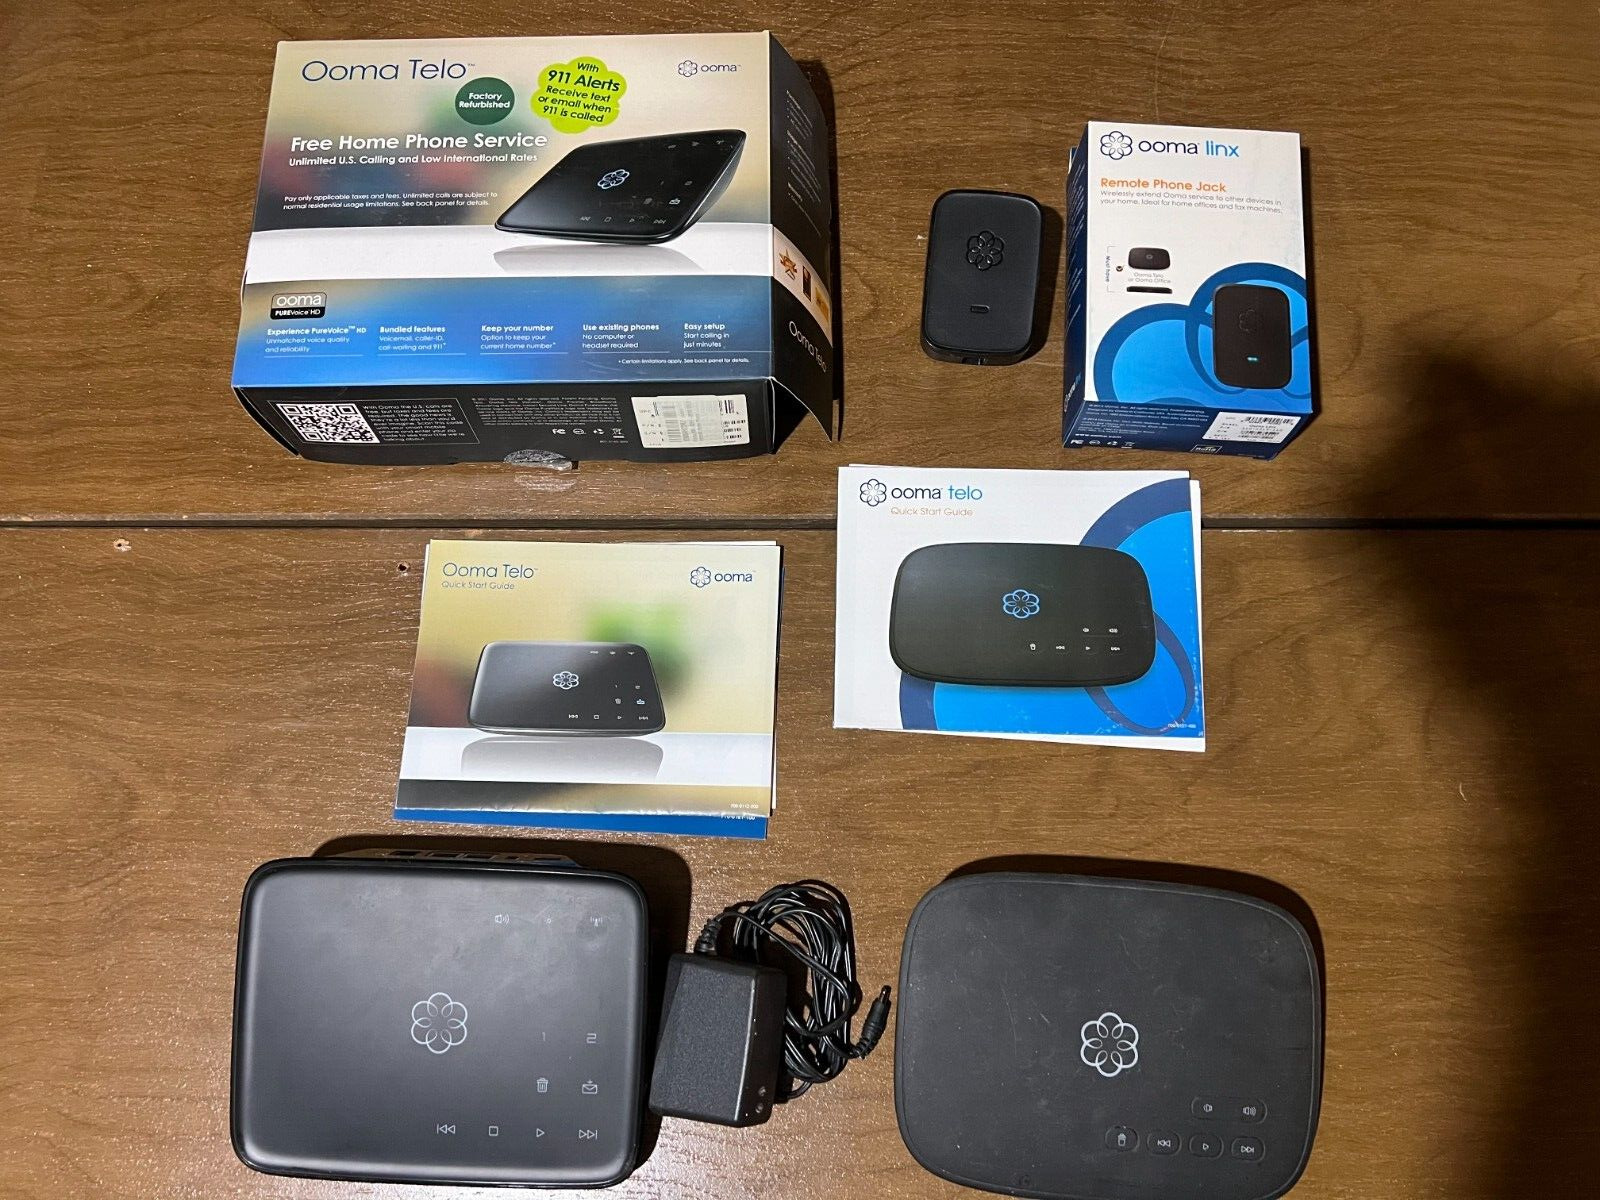 Ooma Telo Free Home Phone Service VoIP Phone - Black & a Ooma Linx remote Jack 